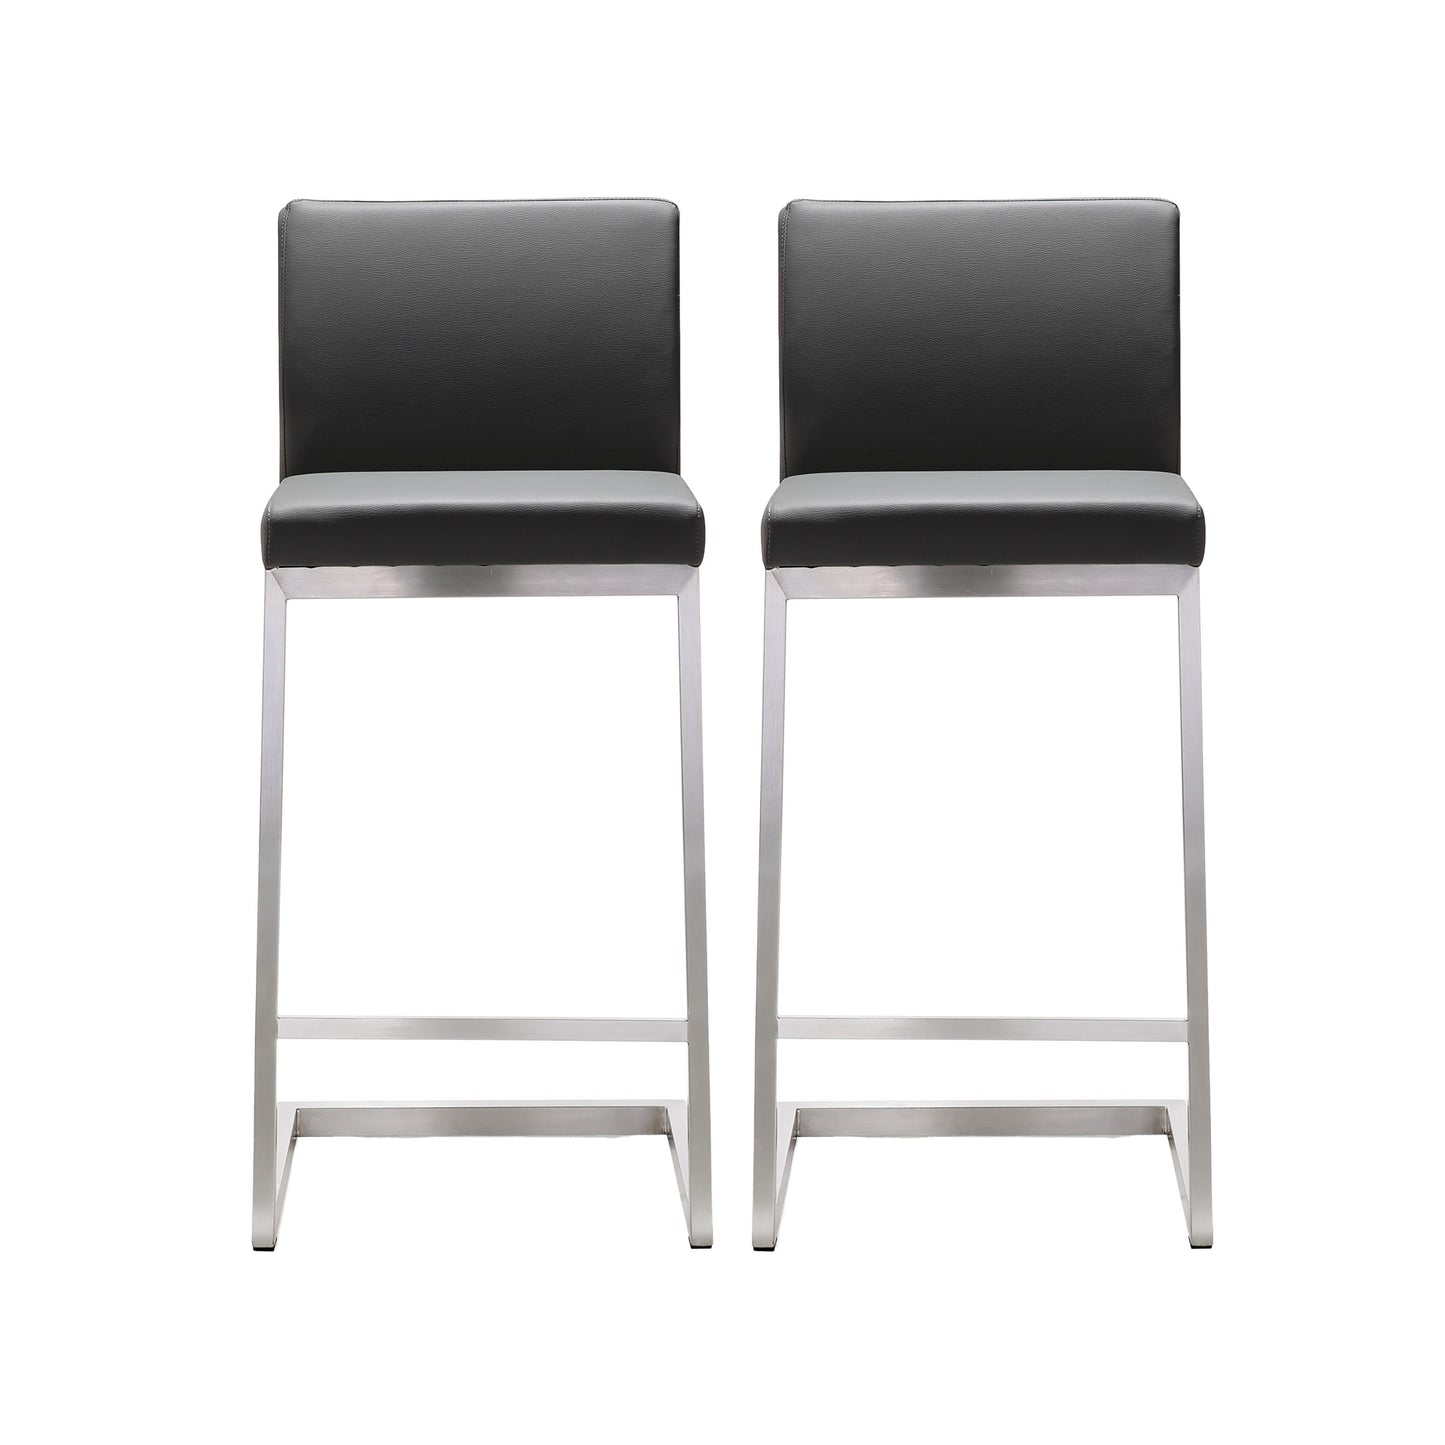 Tov Furniture Parma Grey Stainless Steel Counter Stool Set of 2